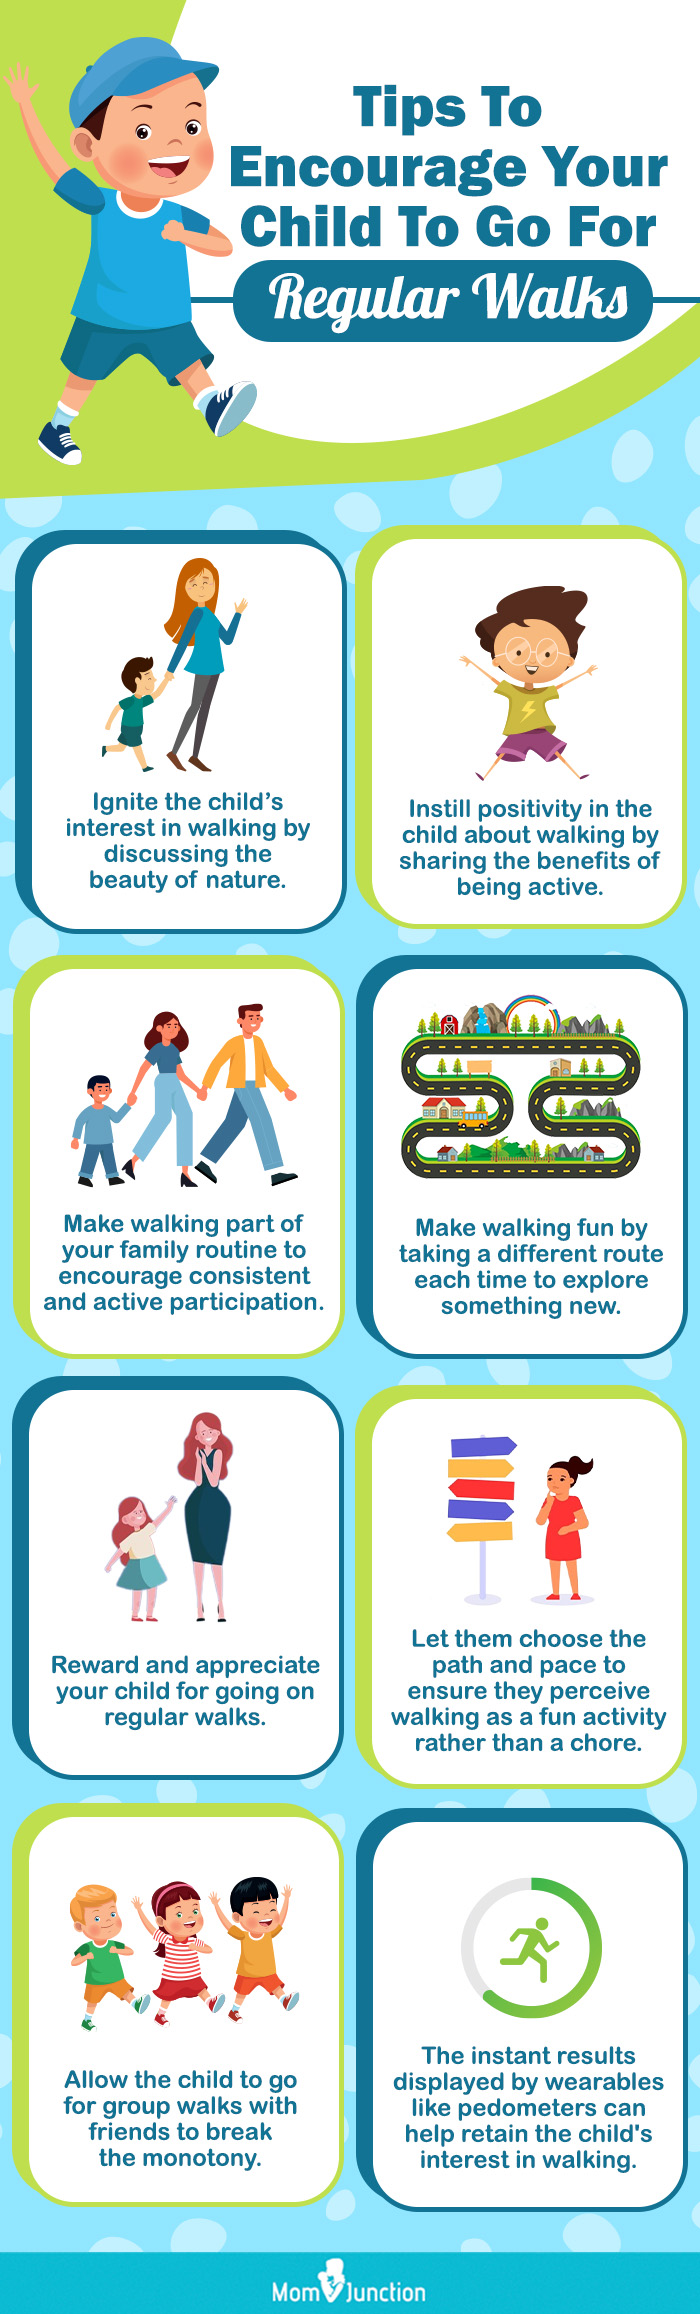 Tips To Encourage Your Child To Go For Regular Walks (infographic)